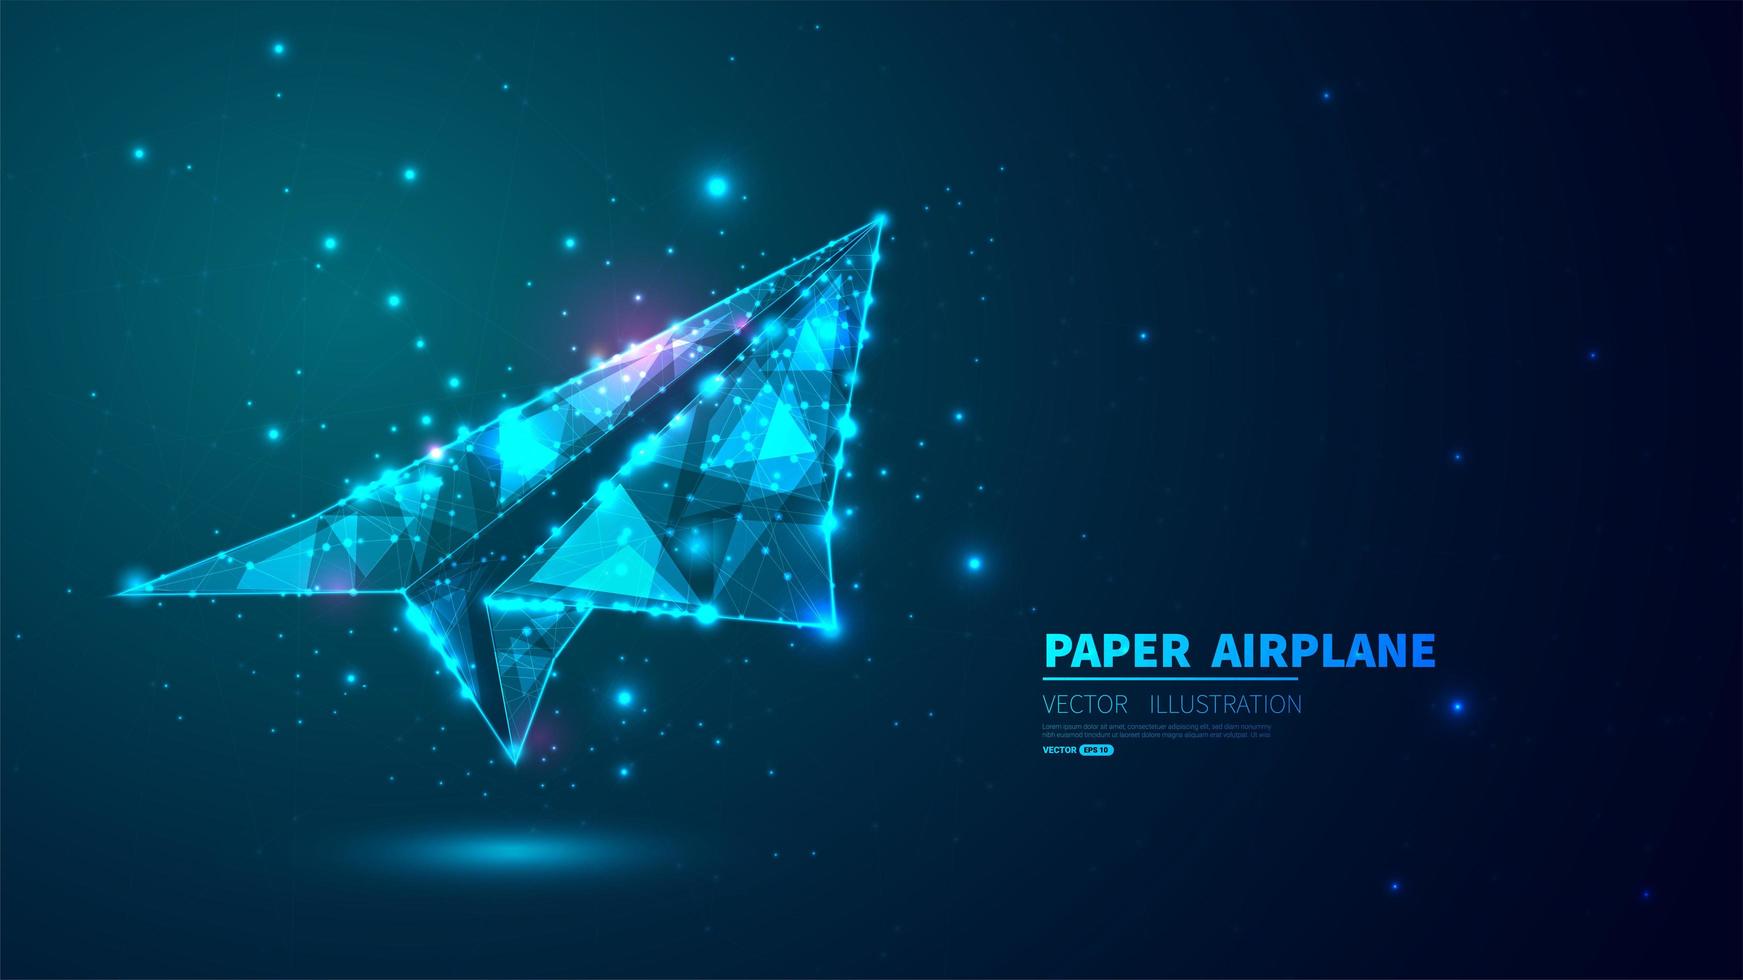 Glowing, futuristic paper airplane background vector